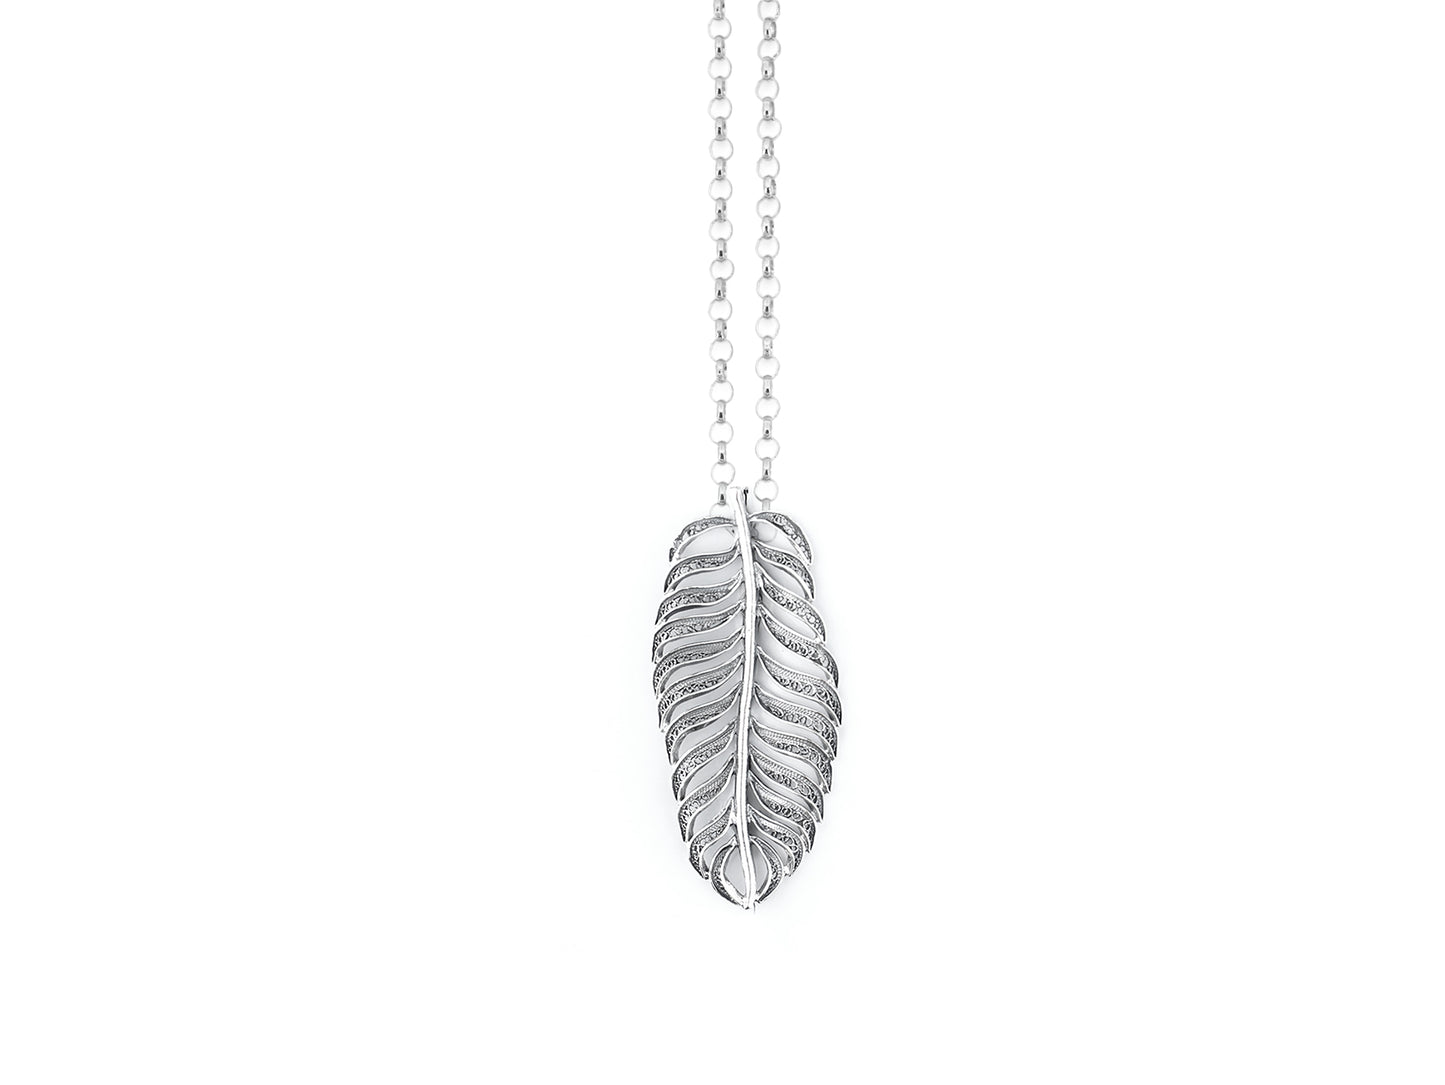 Set of Earrings and Long Leaf Necklace, Portuguese Filigree, 925 Sterling Silver